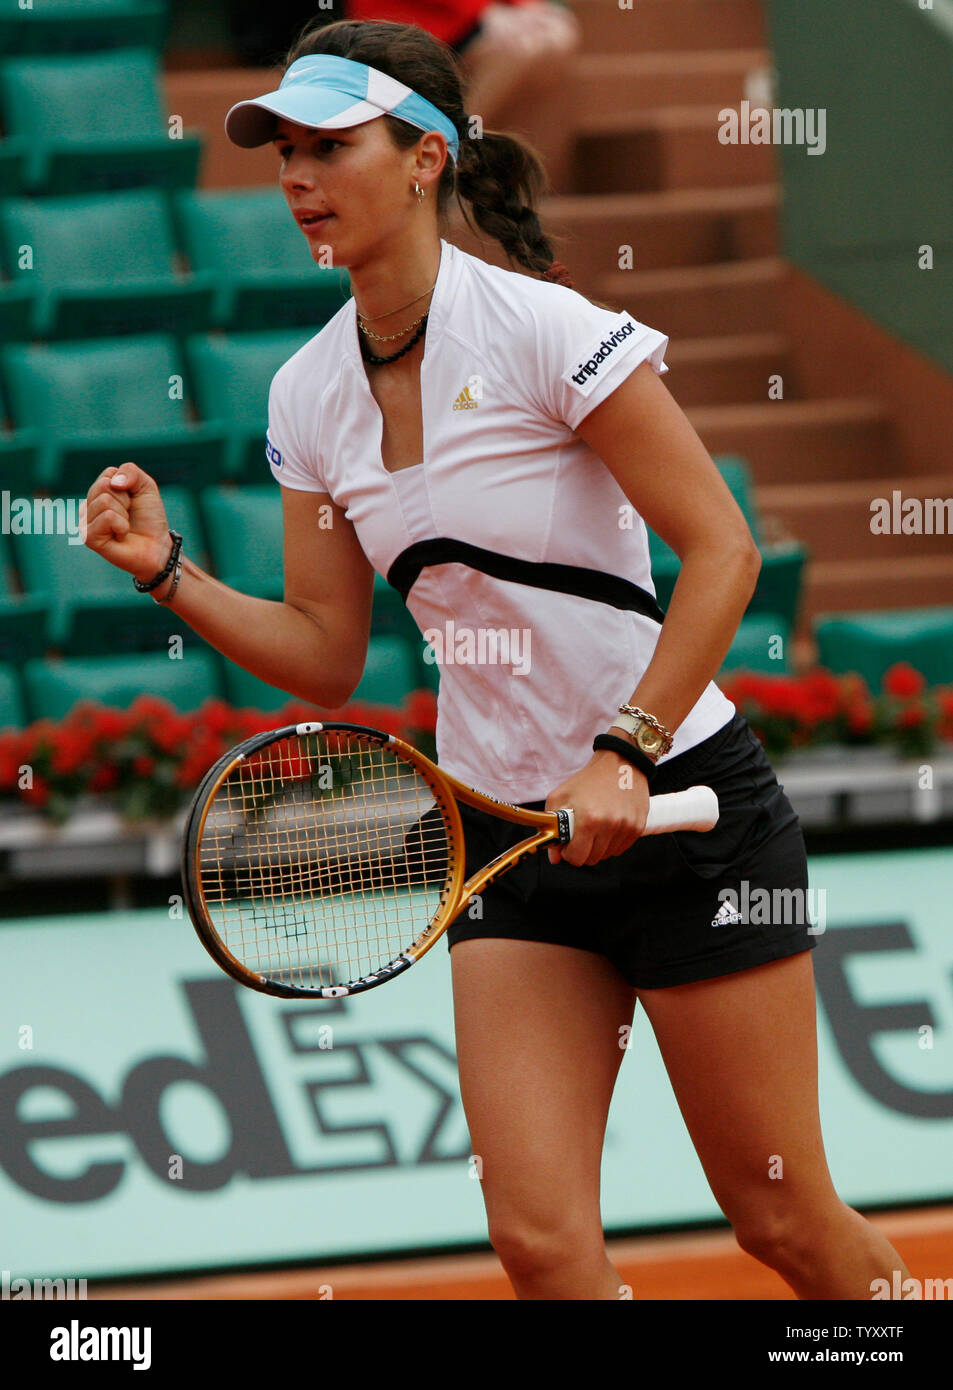 Bulgarian Tsvetana Pironkova reacts to hitting a winner during her first  round match against American Serena Williams at the French Open at Roland  Garros in Paris on May 27, 2007. The match